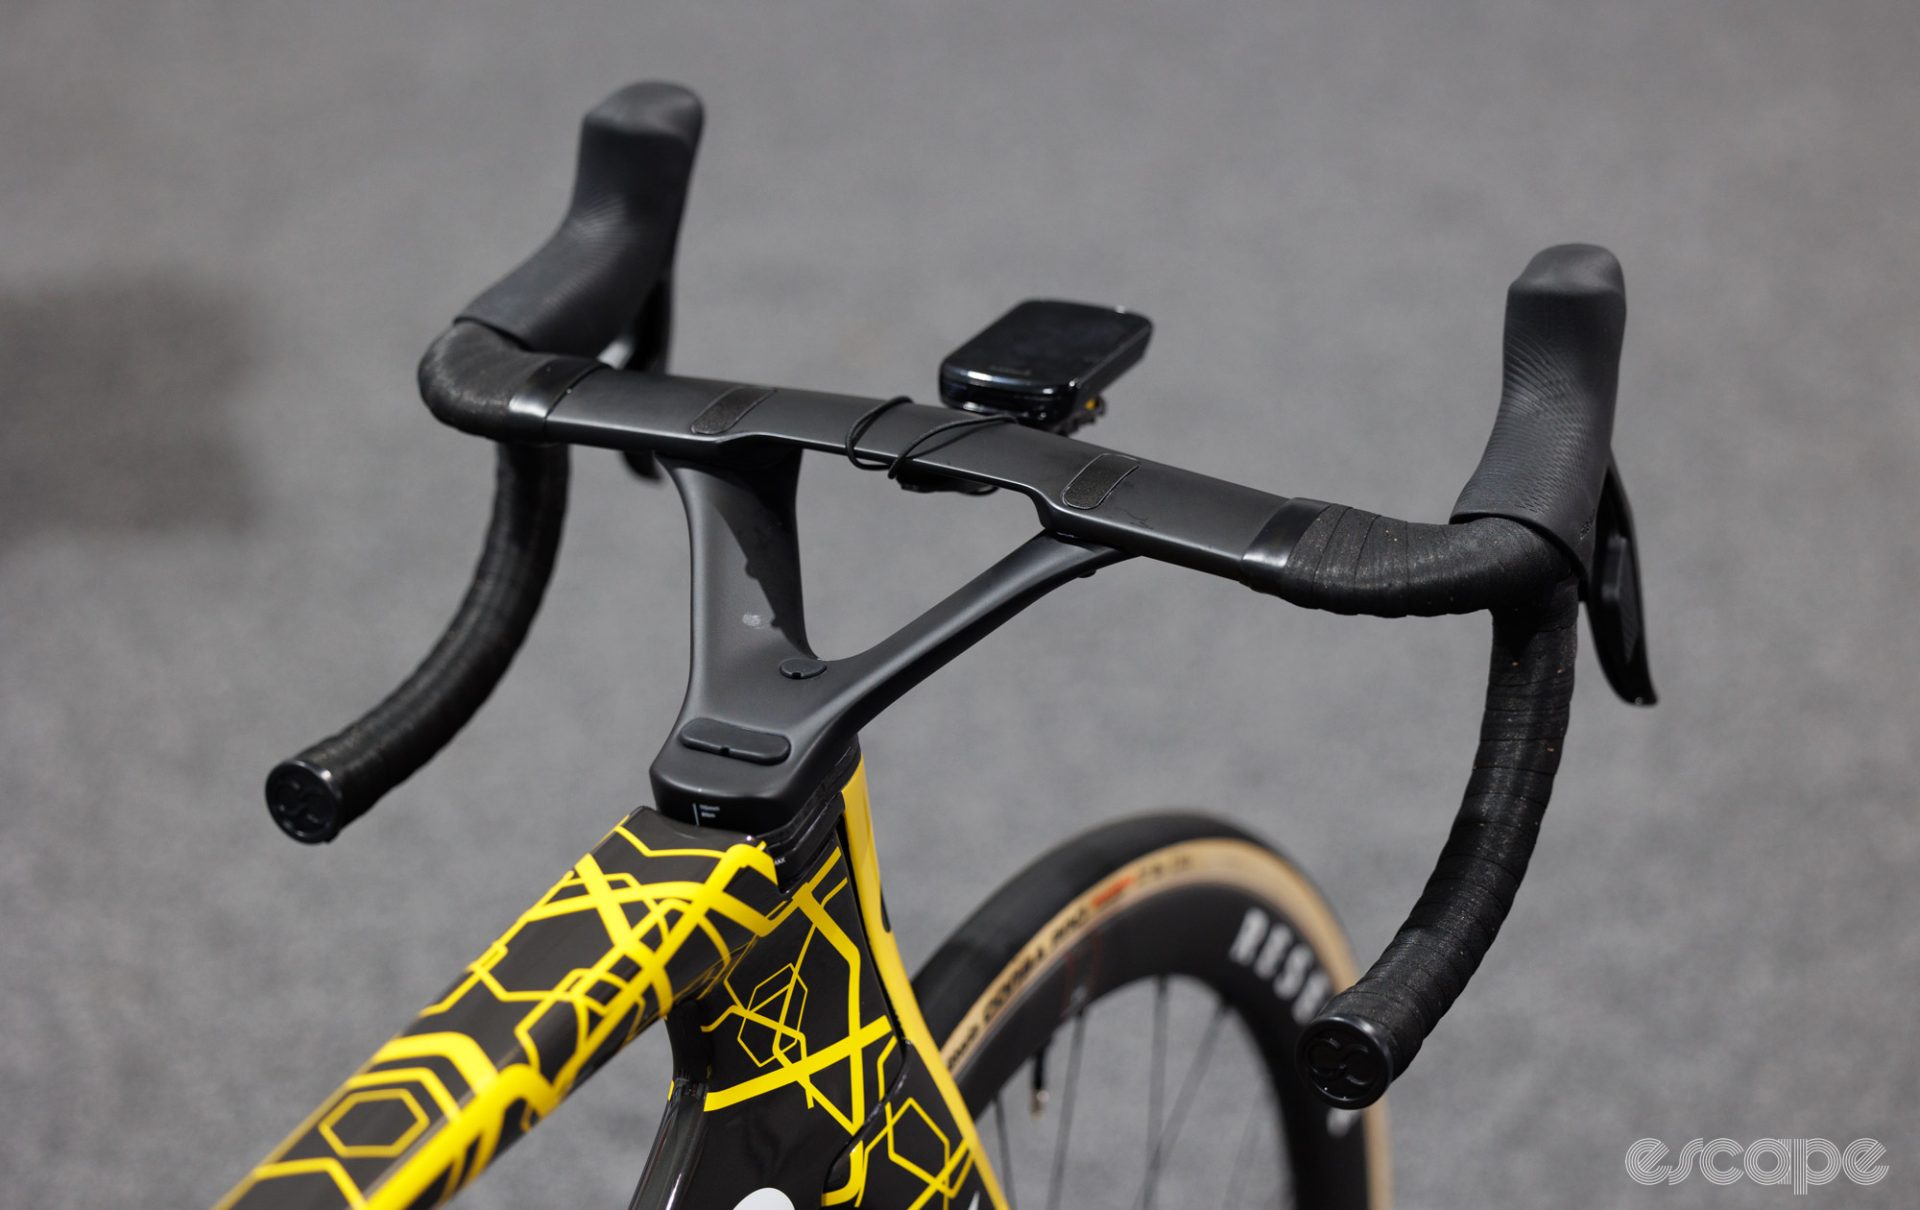 The one-piece bar/stem features a two-armed stem rising to the handlebar.